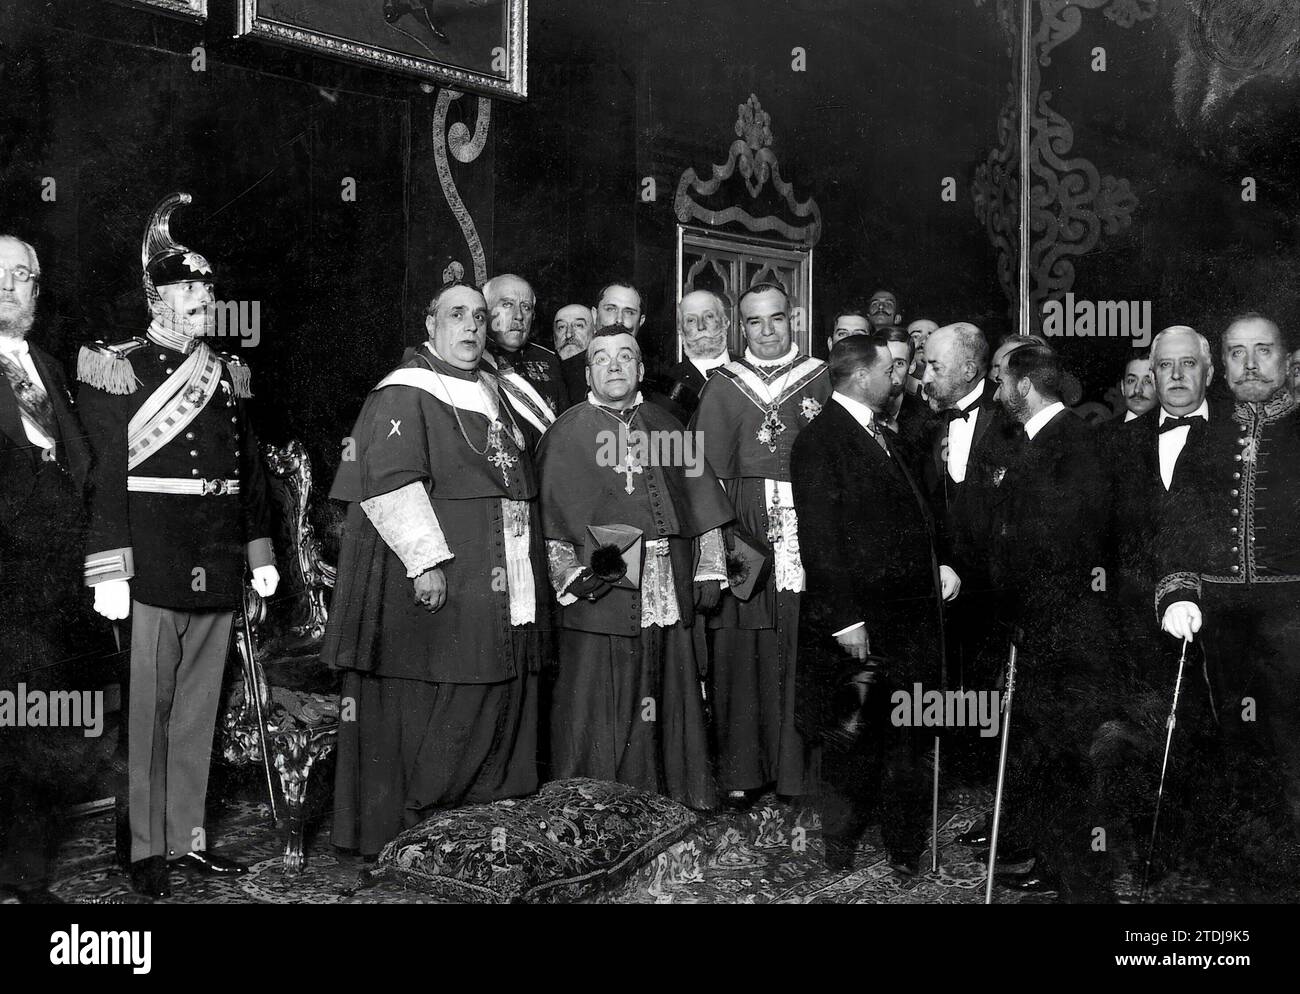 11/30/1911. Imposition of the cardinal's skullcap on the archbishop of Seville. The cardinal in the throne room Surrounded by the Noble Guard, the Bishops of Jaén, Madrid-Alcalá and Authorities. Credit: Album / Archivo ABC / Juan Barrera Stock Photo